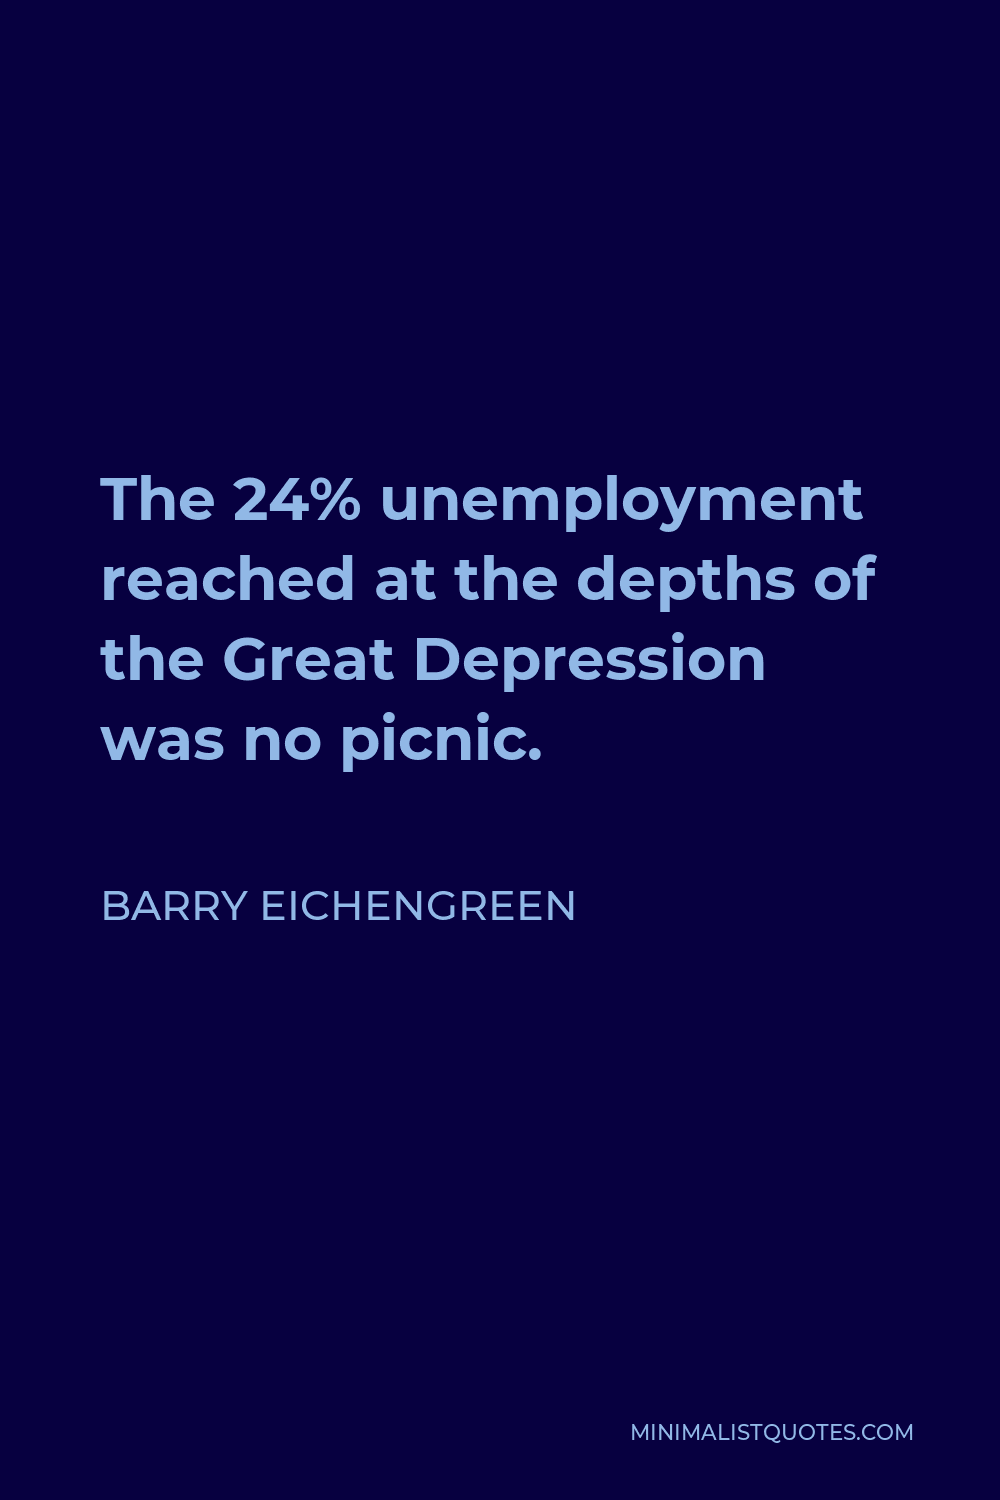 Barry Eichengreen Quote - The 24% unemployment reached at the depths of the Great Depression was no picnic.